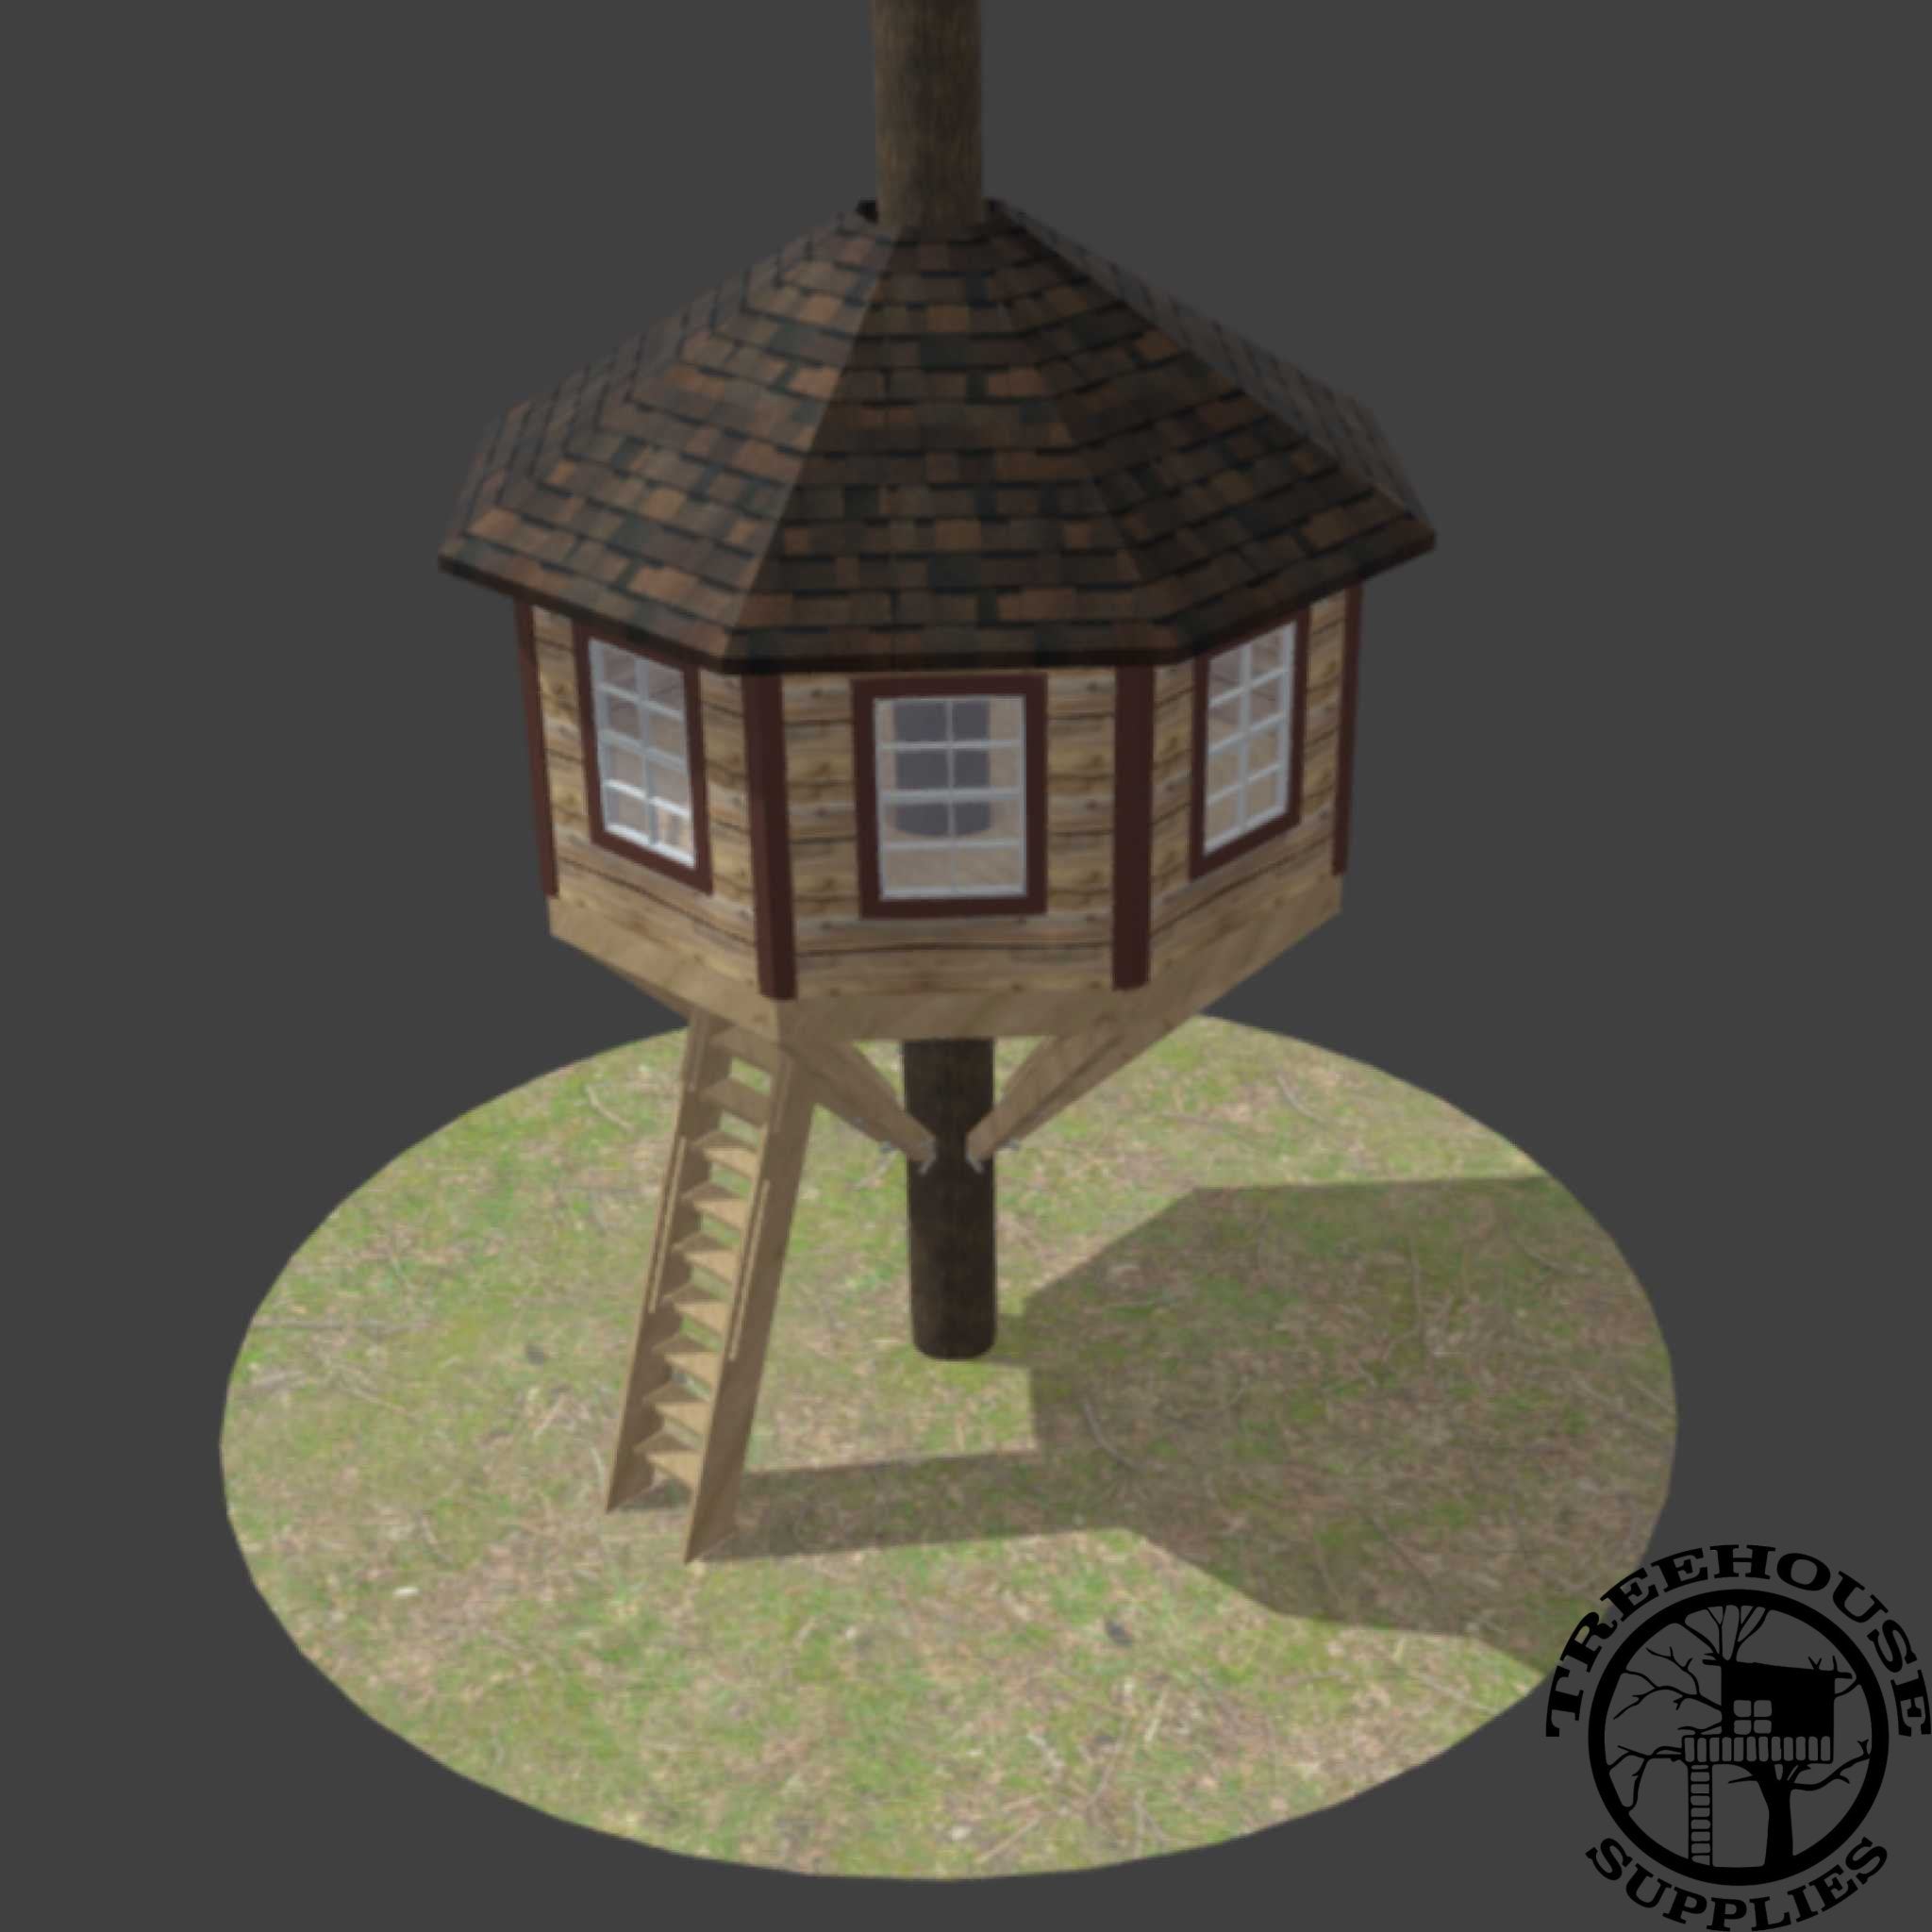 10' DIAMETER OCTAGONAL TREEHOUSE PLAN - NOW INCLUDES STEP-BY-STEP 3D MODELING!! - Treehouse Supplies